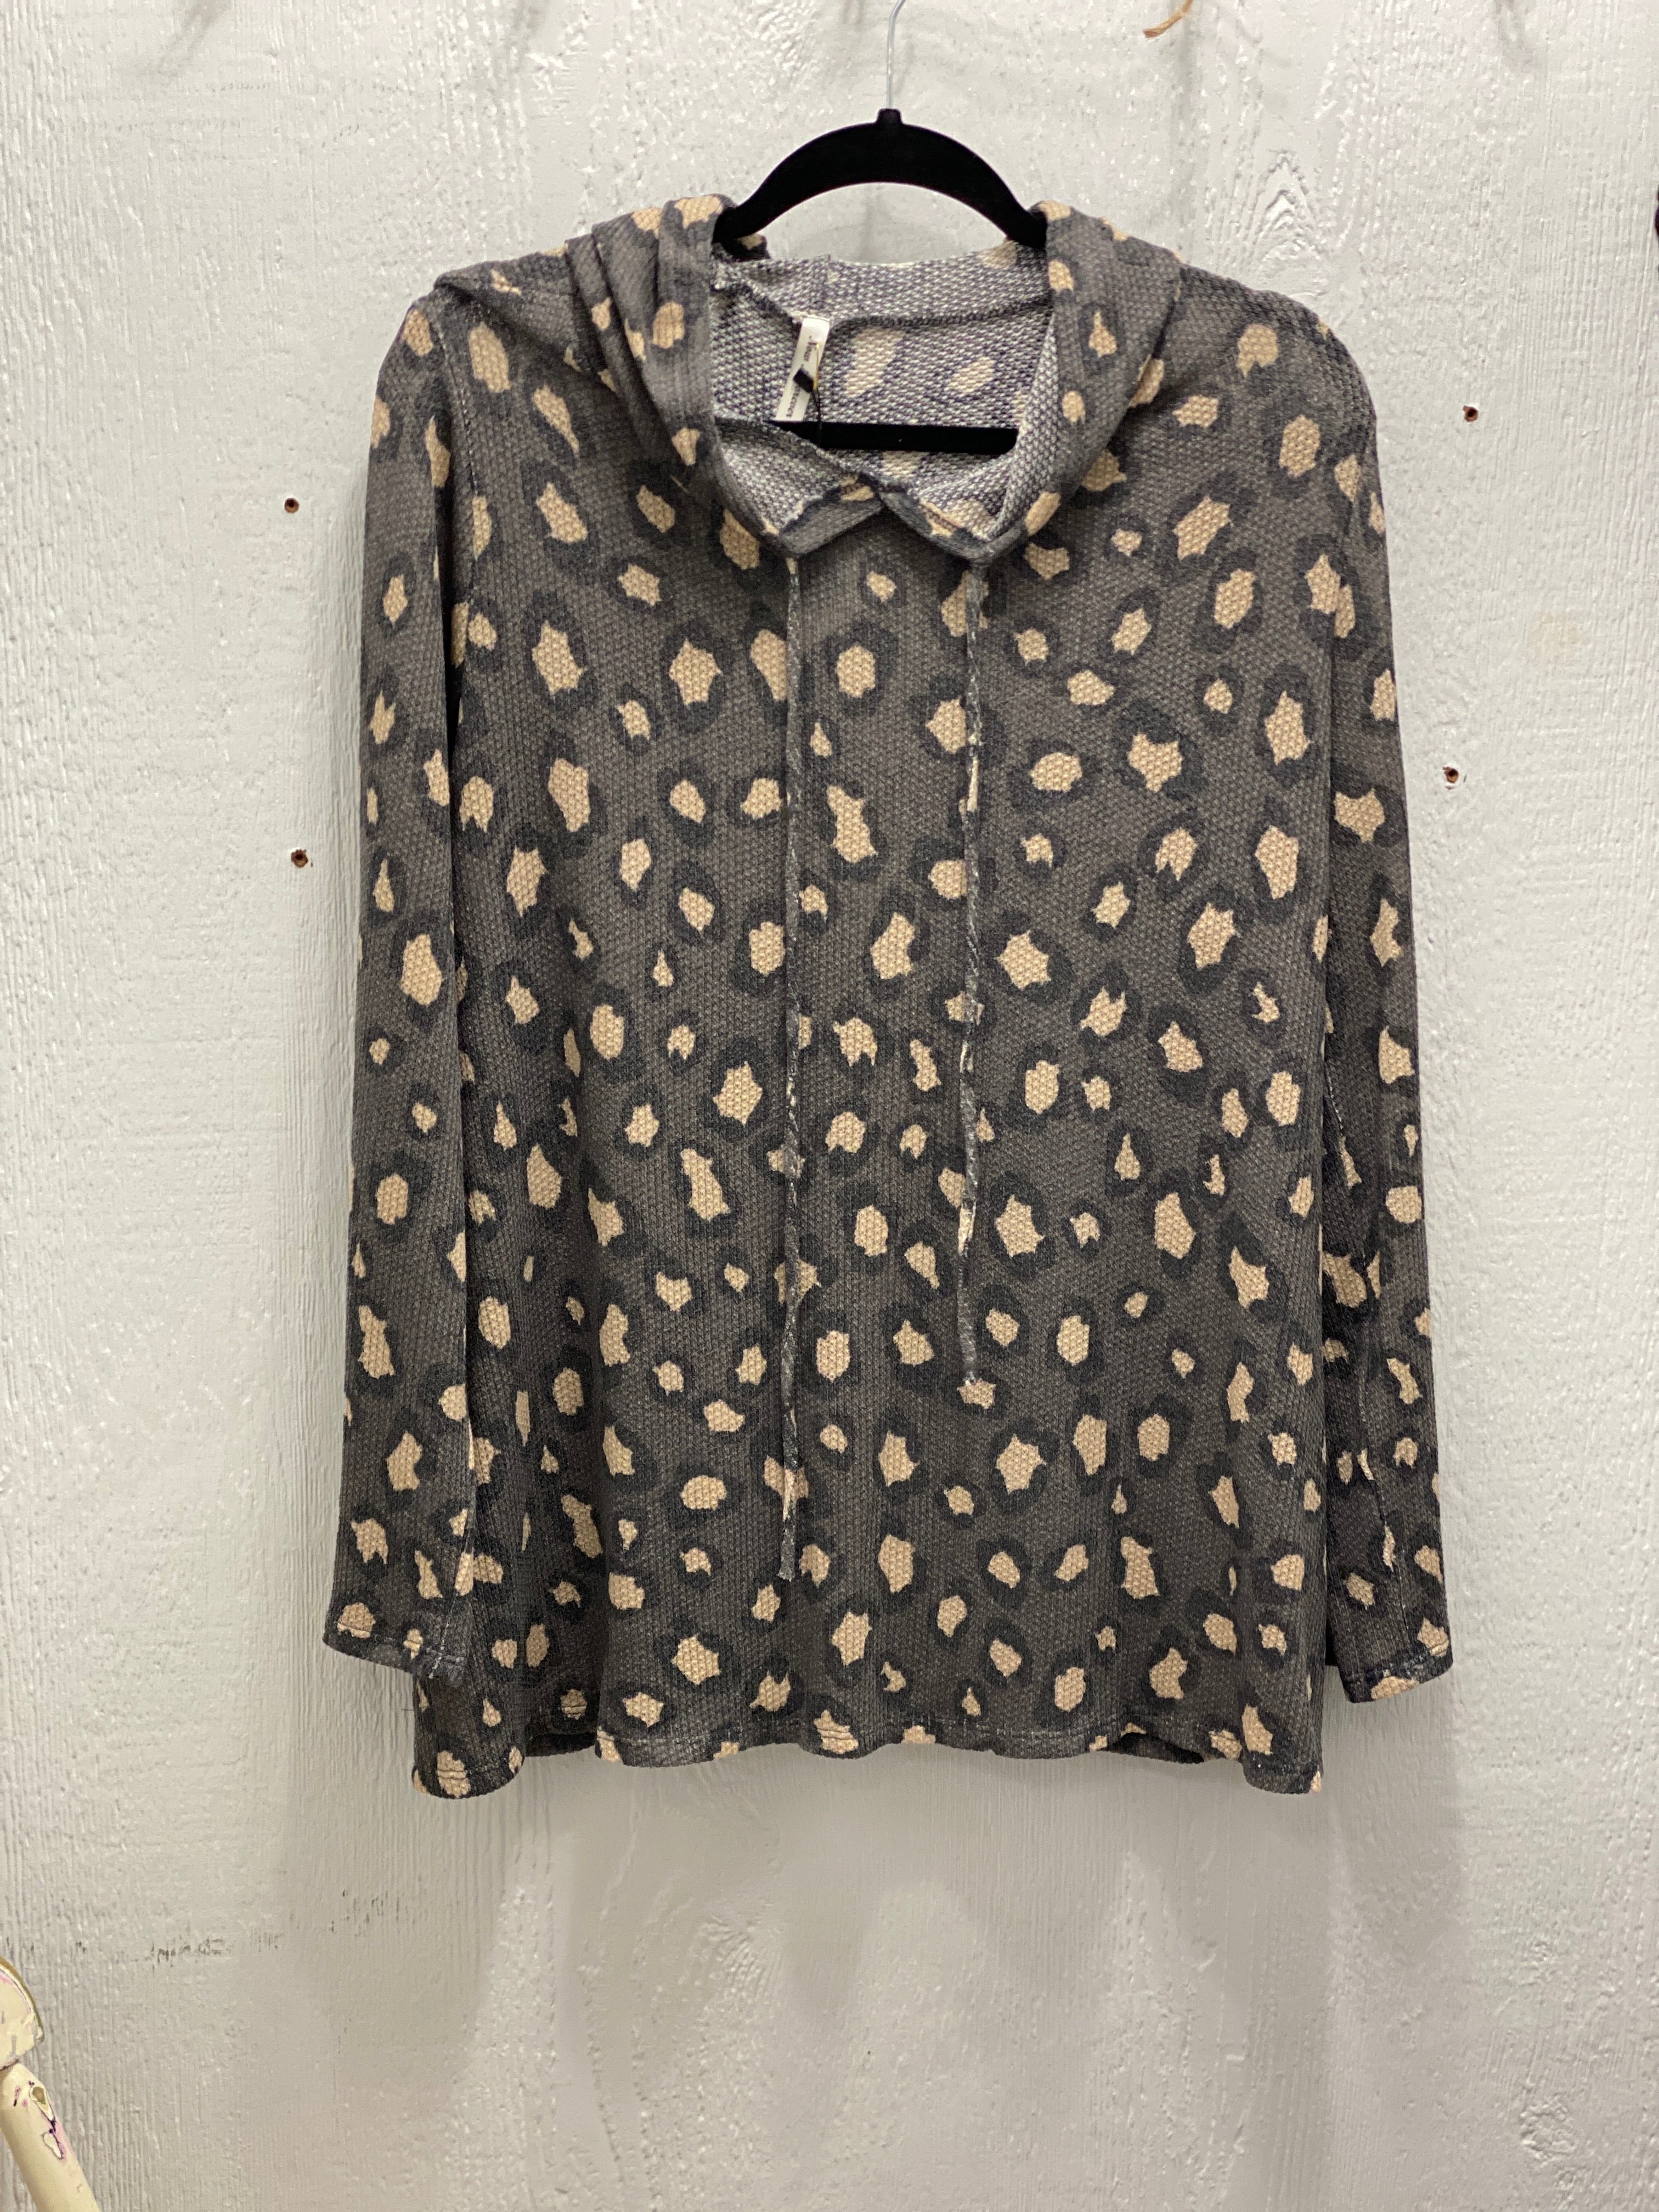 This Is It Leopard Charcoal Print Hoodie Top